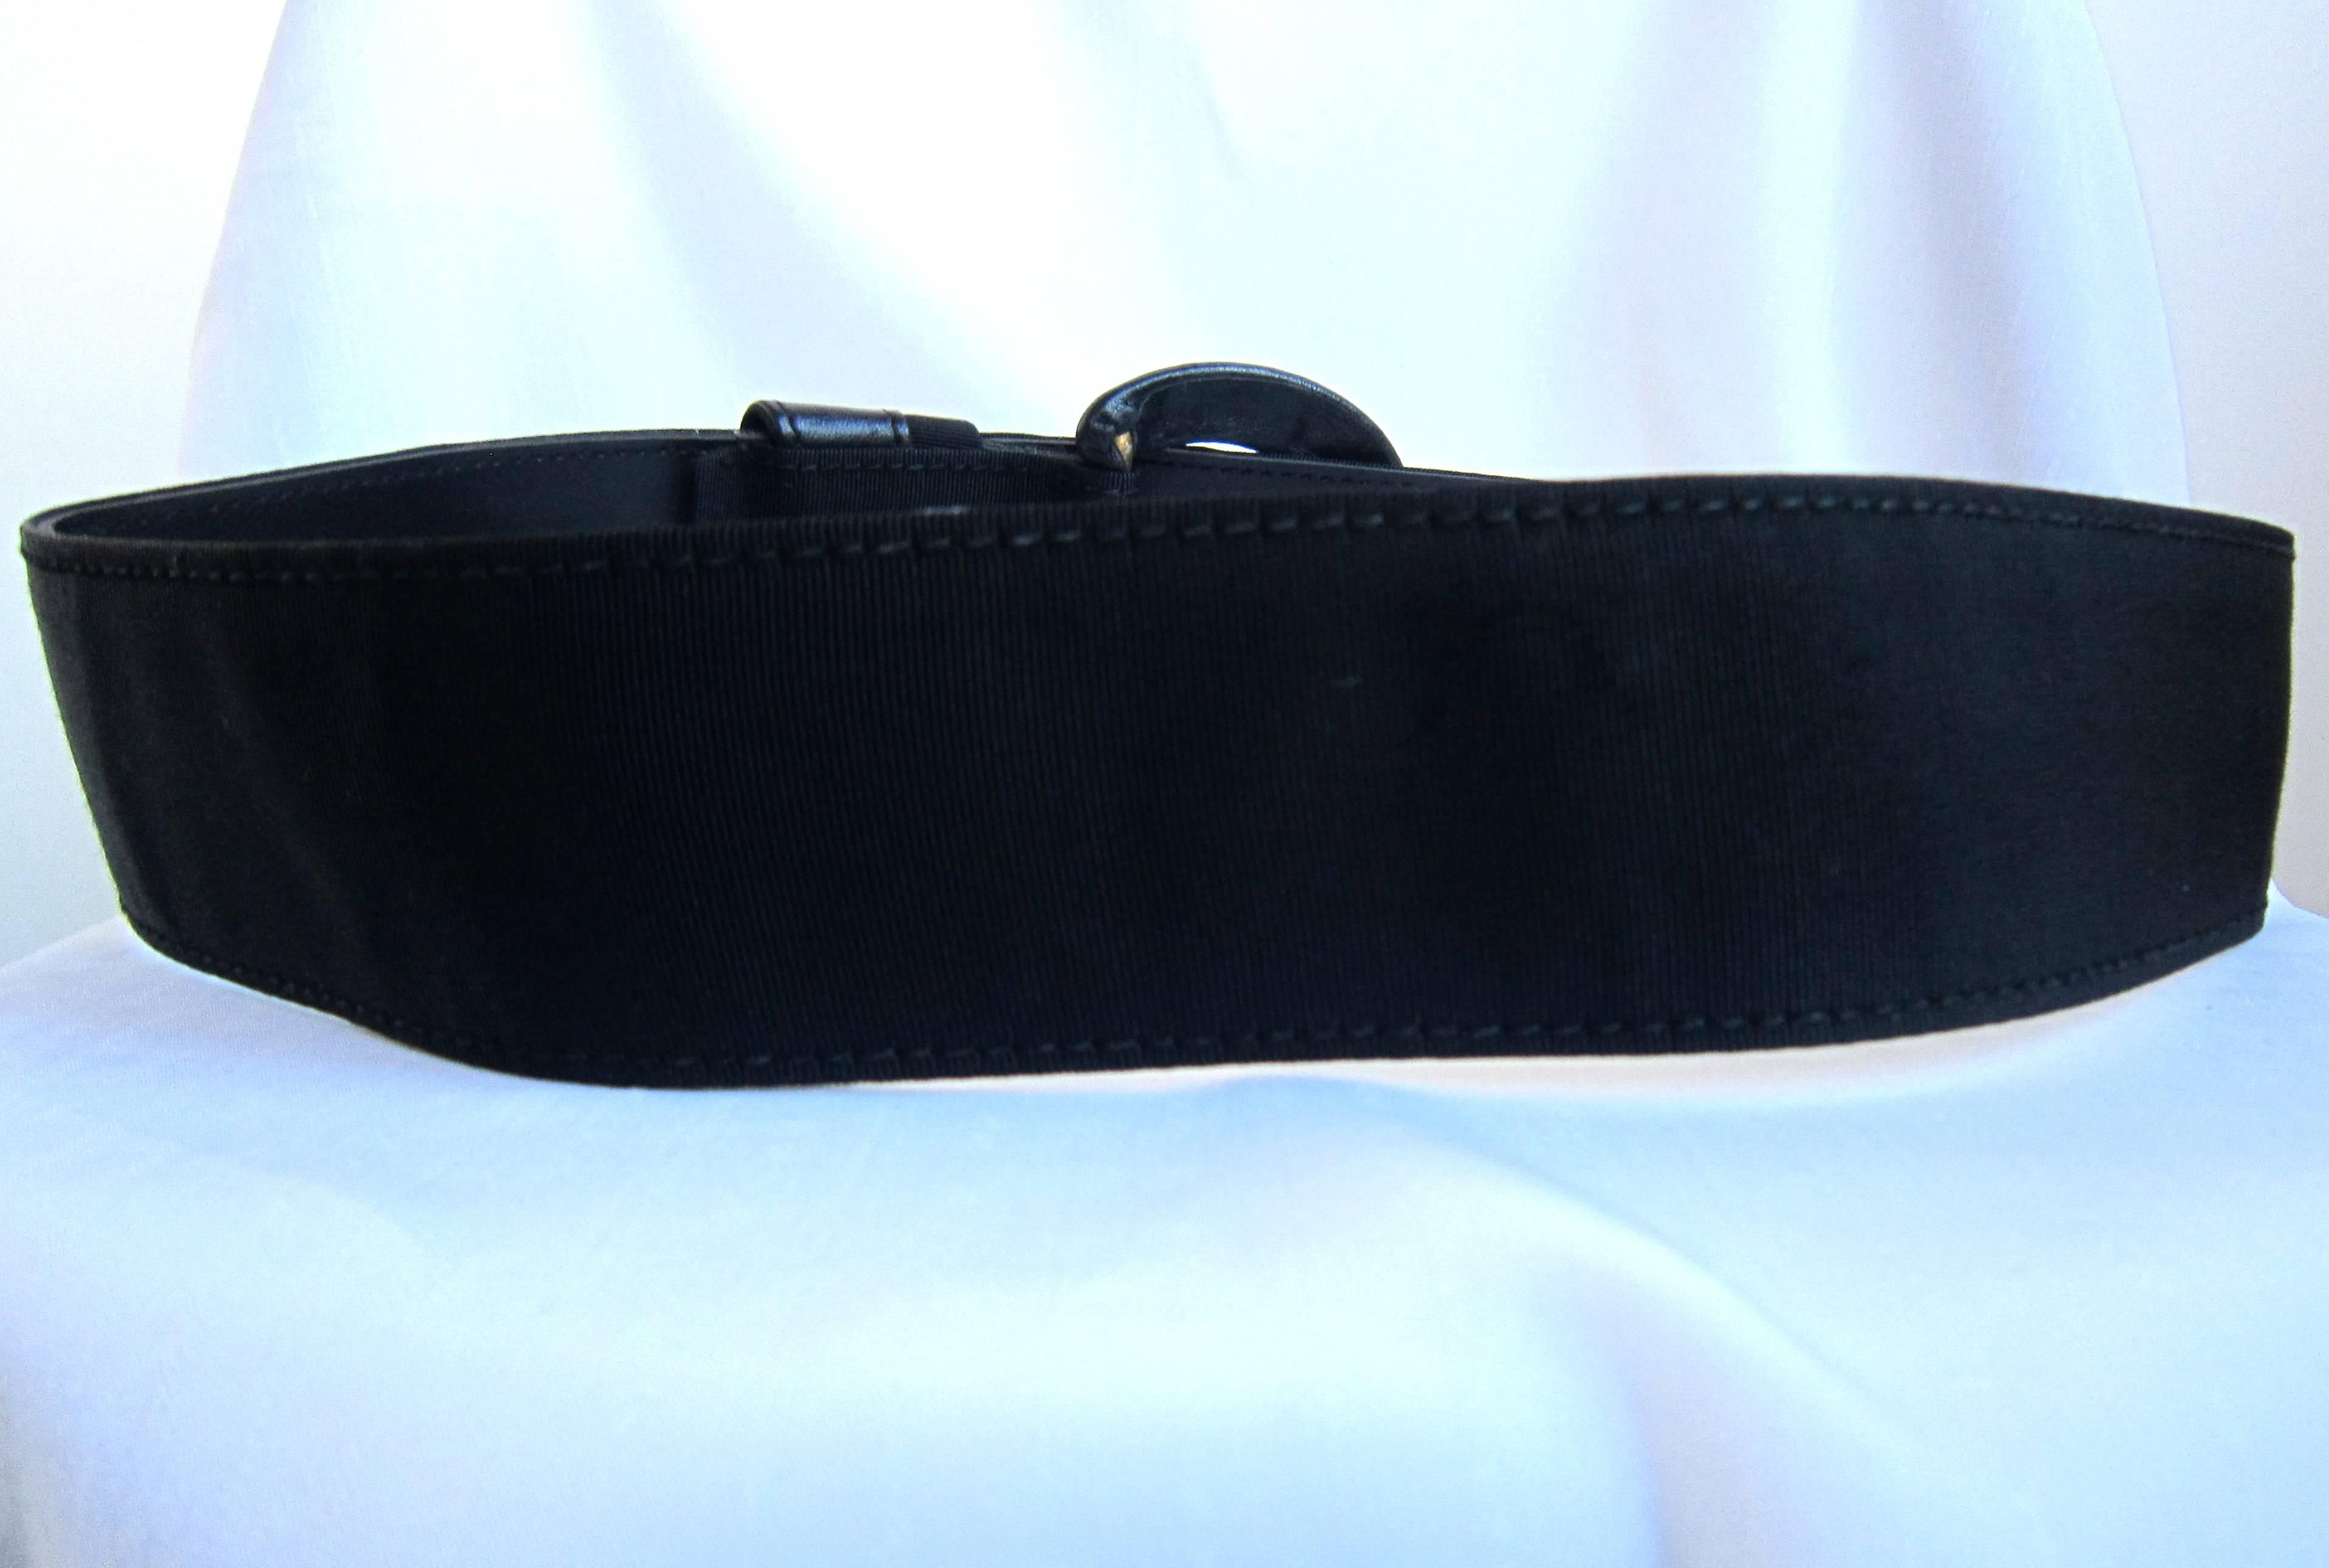 Gianni Versace vintage black fabric and leather belt, 1980s

Brand: Gianni Versace

Material: leather and fabric

Hardware: silver metal

Condition: good condition,few sign of wear
cod 60792

Size: 70

Measurements: lenght 84cm, Width 4,5 cm